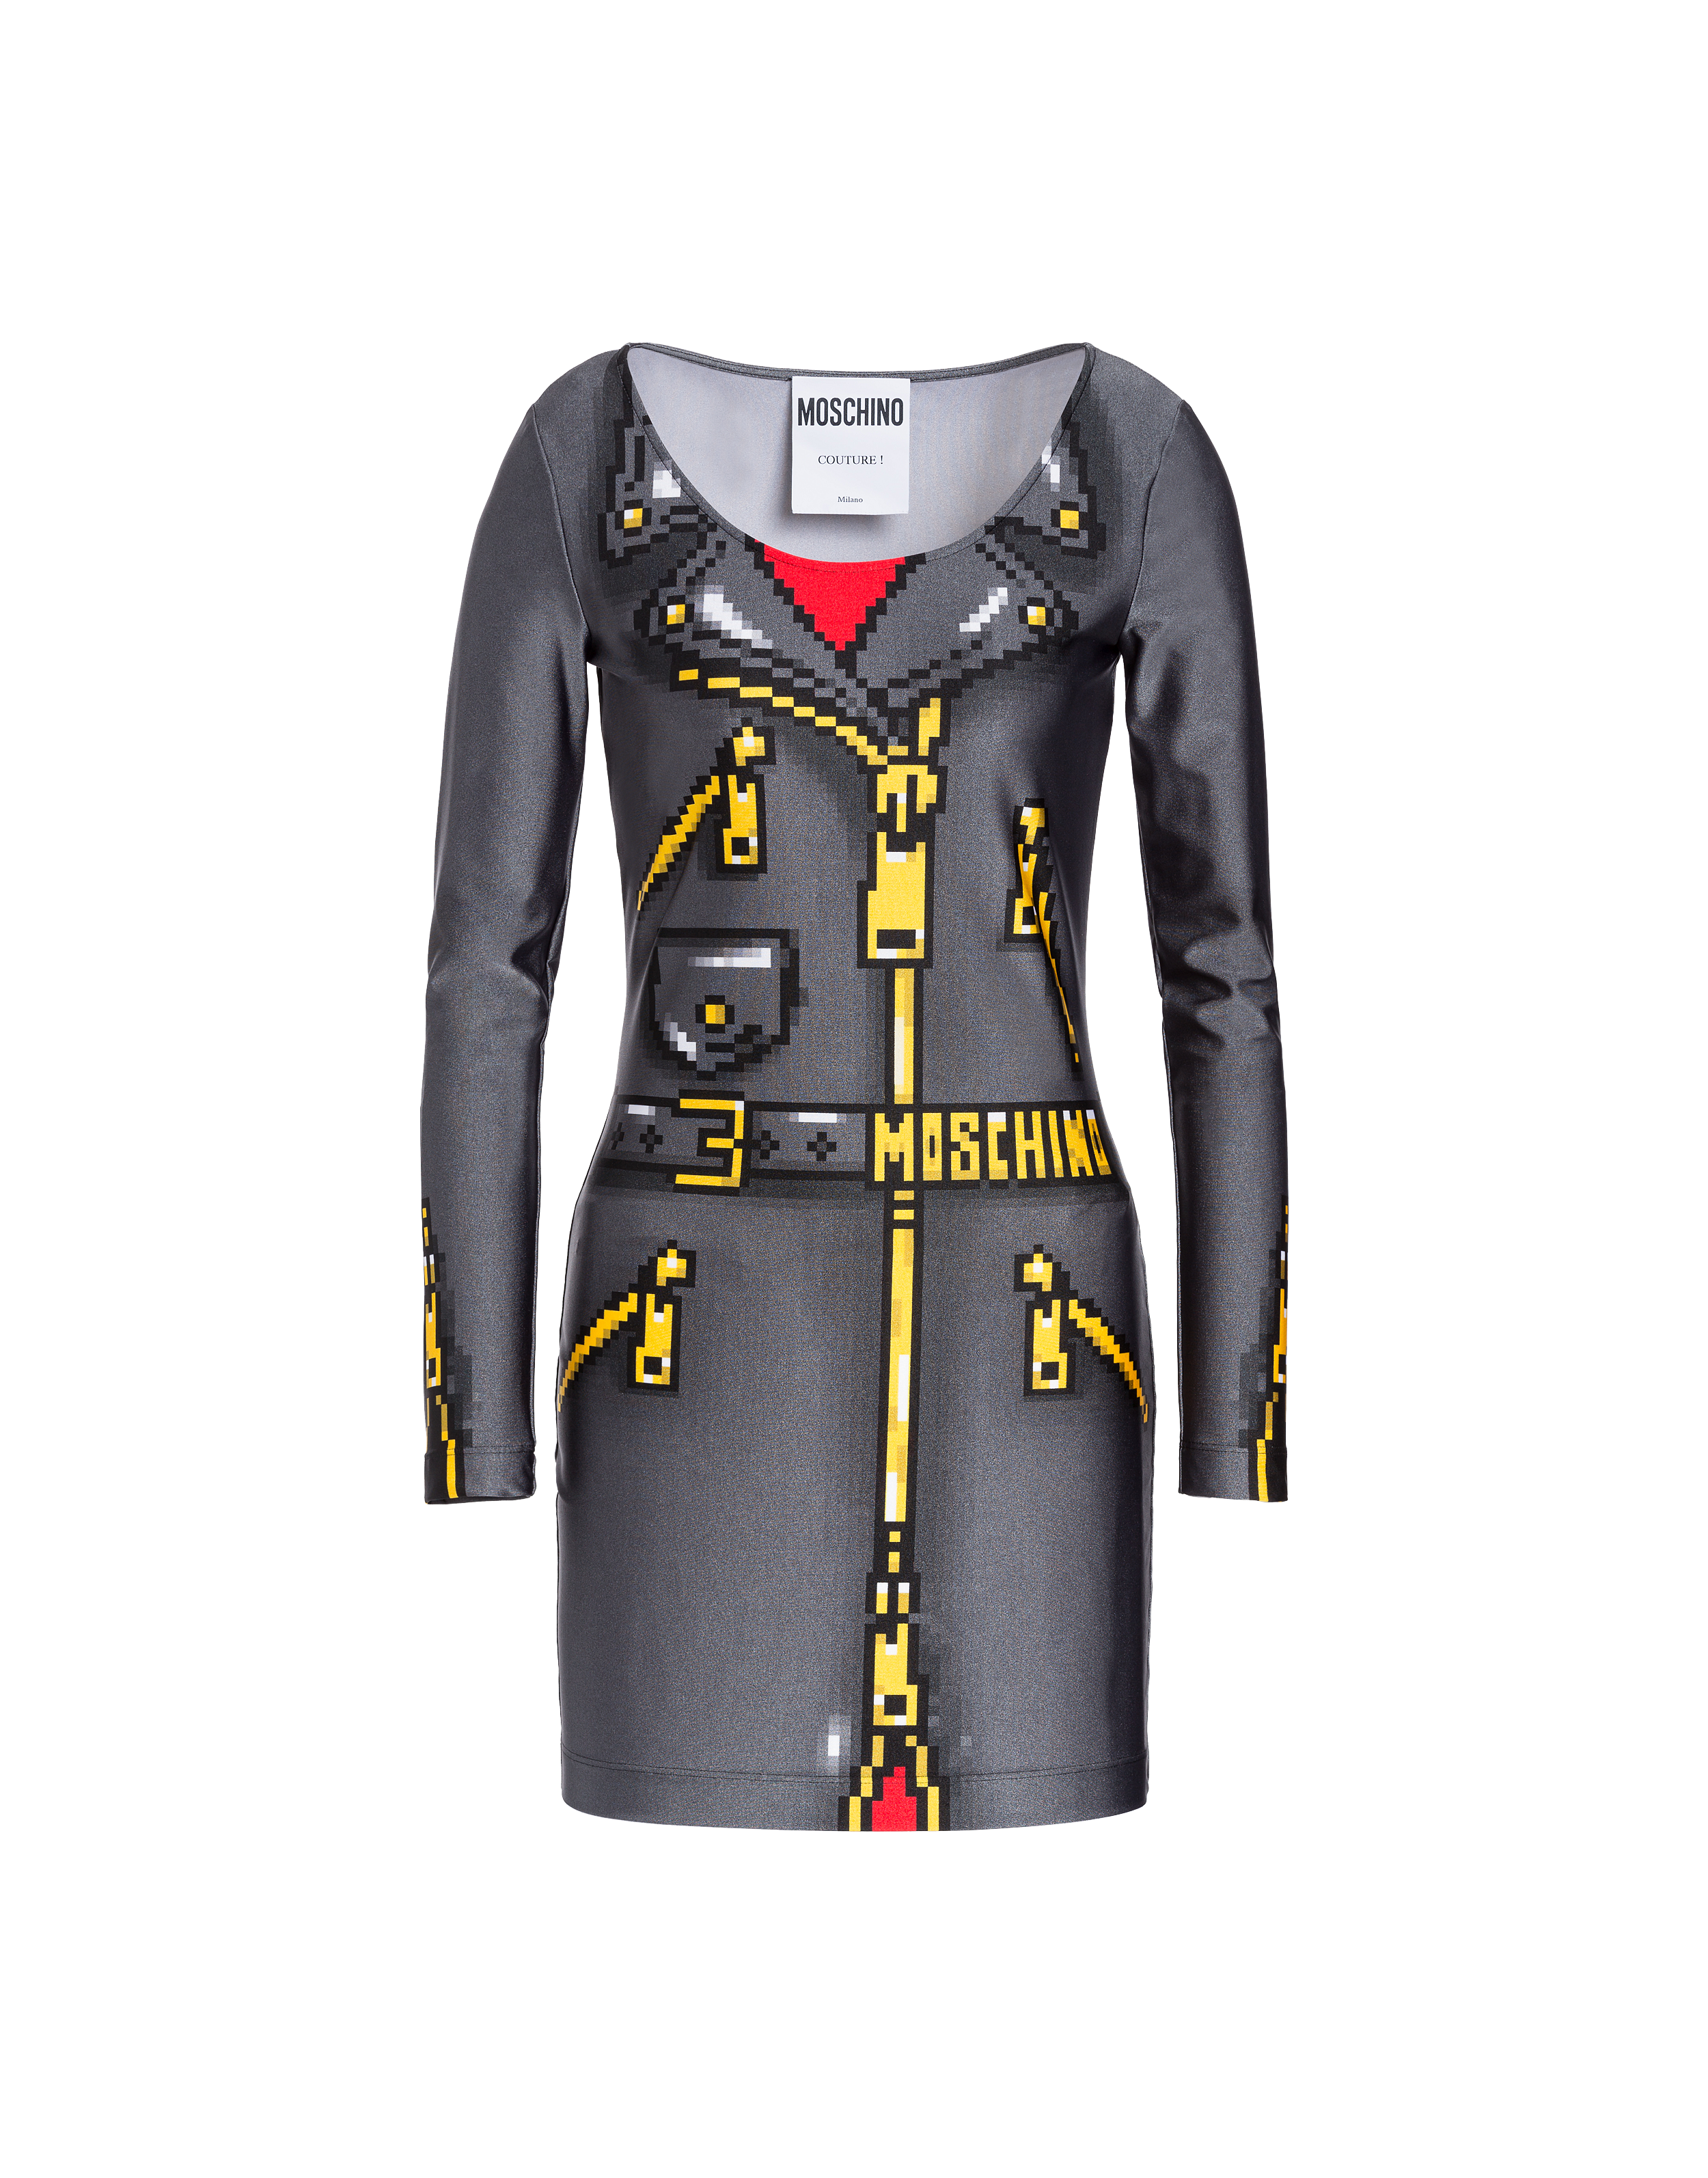 The Sims - You can now dress your sims in a @Moschino